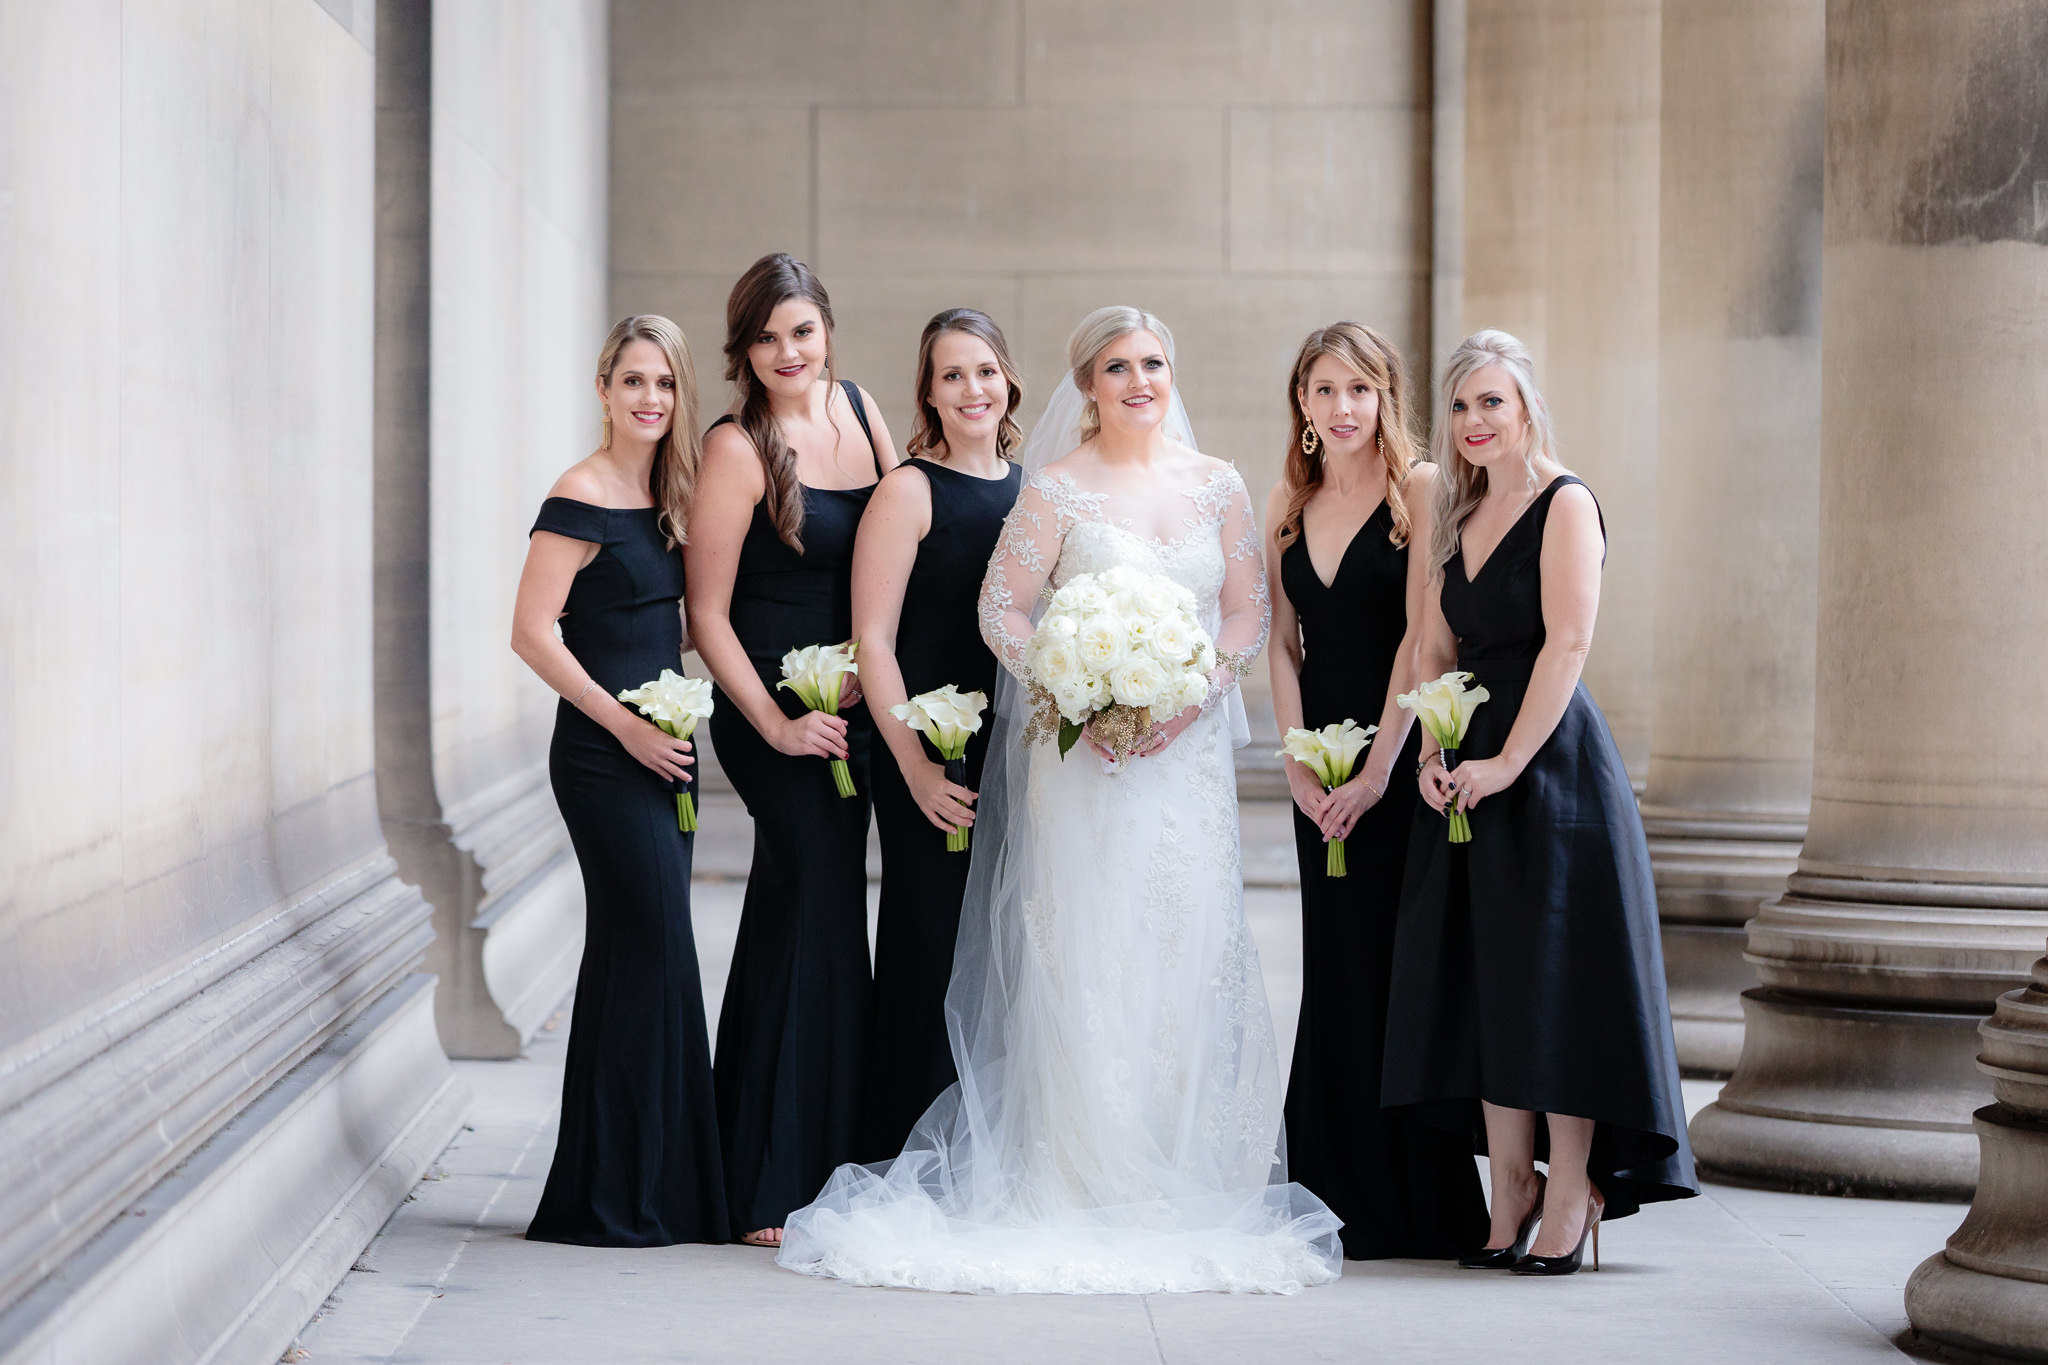 Bride & bridesmaids in classic black dresses before a Soldiers & Sailors wedding